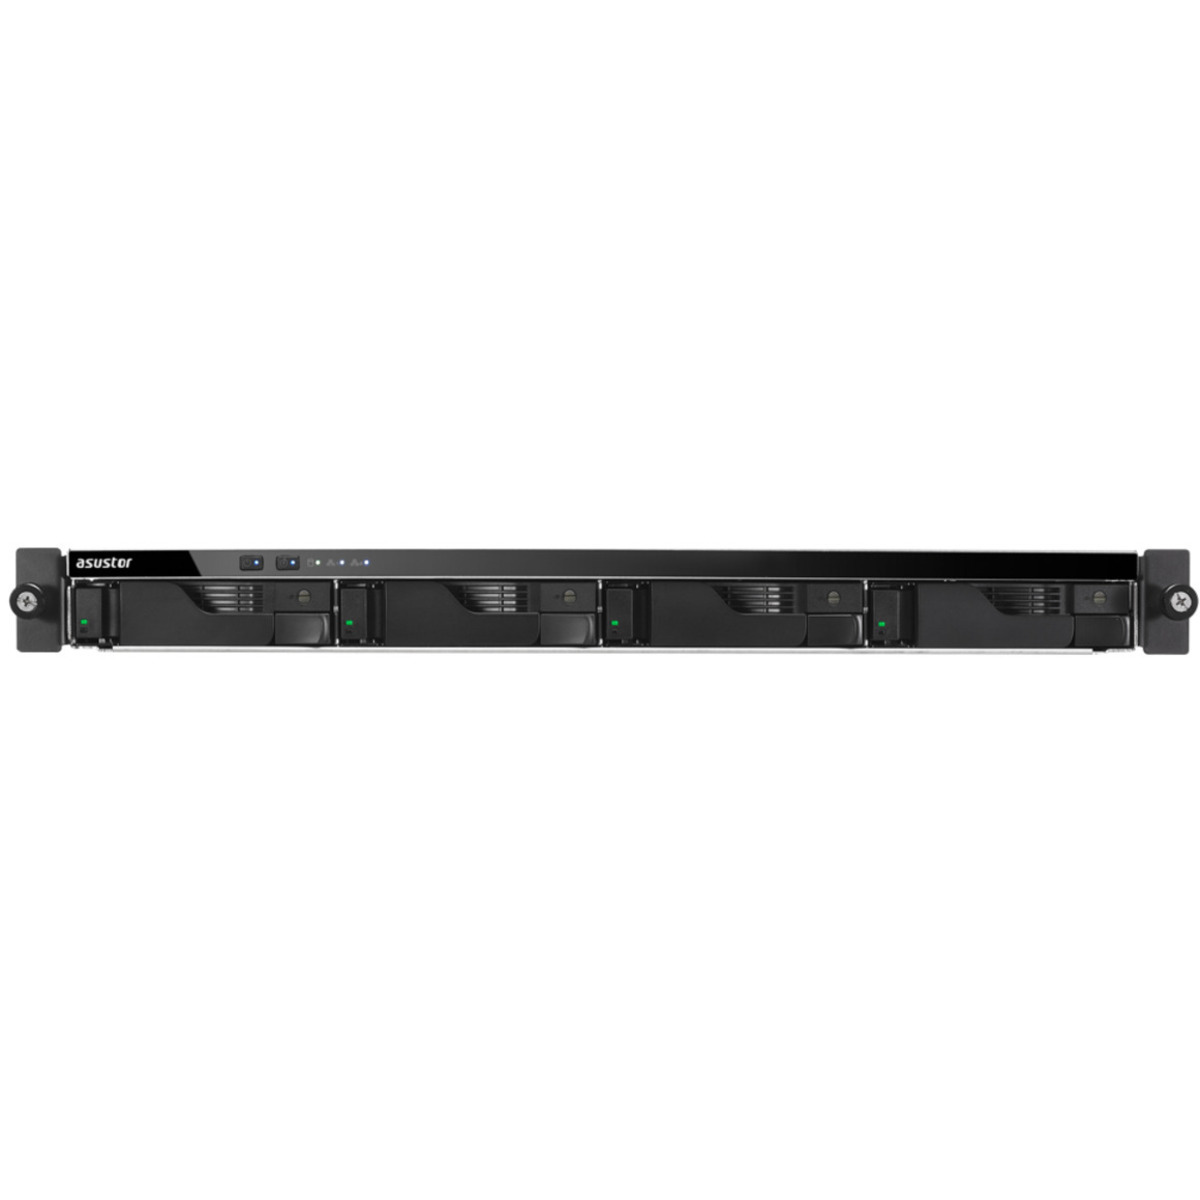 ASUSTOR LOCKERSTOR 4RS AS6504RS 60tb 4-Bay RackMount Multimedia / Power User / Business NAS - Network Attached Storage Device 3x20tb Western Digital Red Pro WD201KFGX 3.5 7200rpm SATA 6Gb/s HDD NAS Class Drives Installed - Burn-In Tested - FREE RAM UPGRADE LOCKERSTOR 4RS AS6504RS